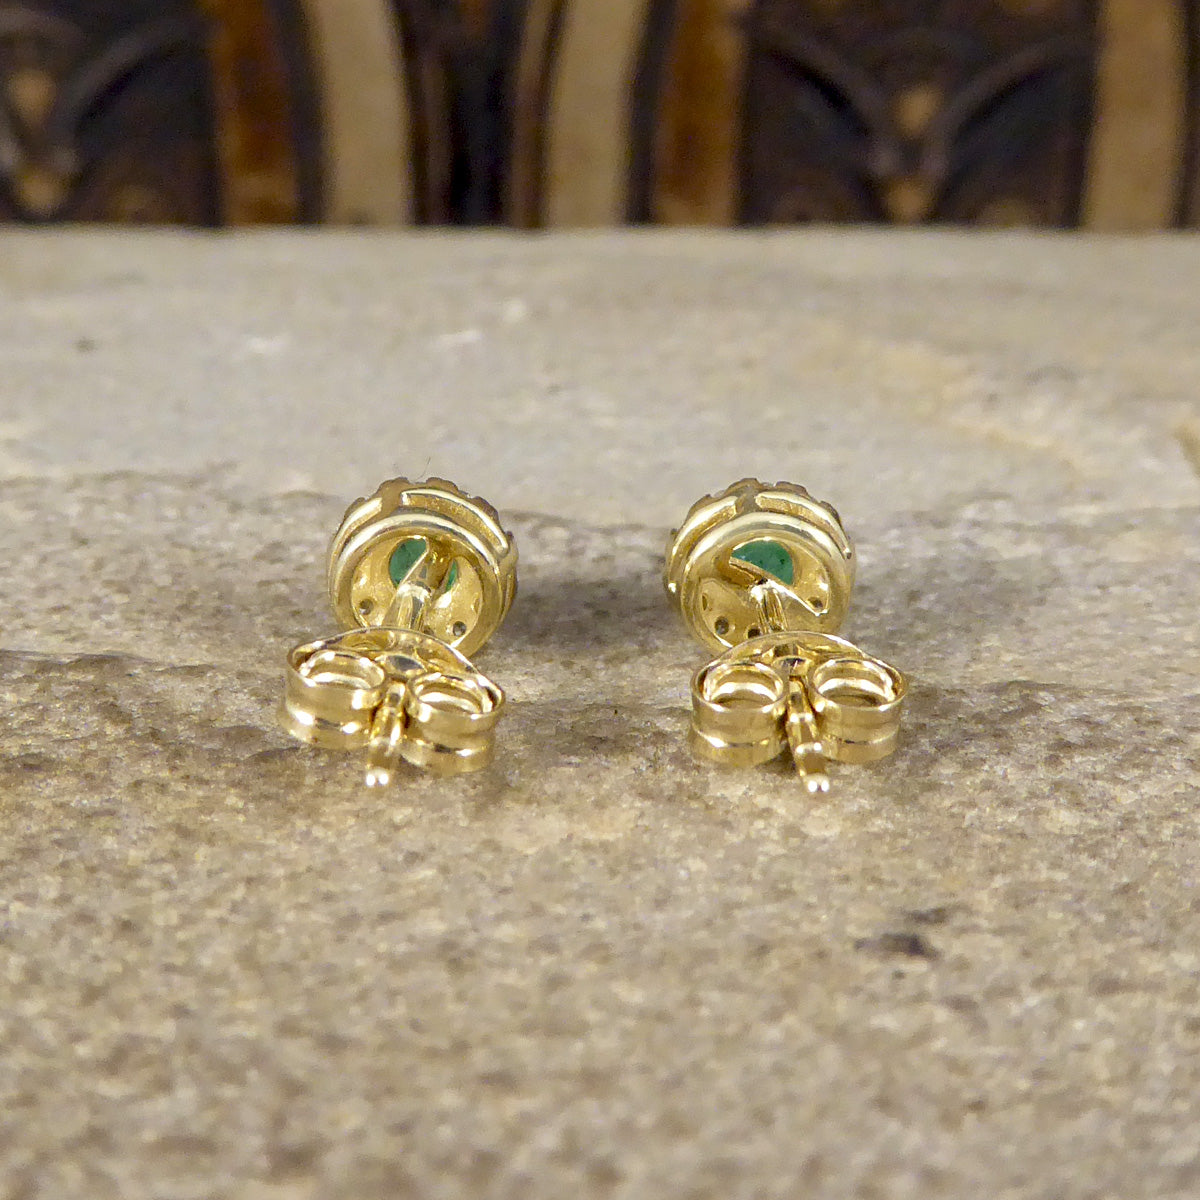 Emerald and Diamond Target Cluster Stud Earrings in 9ct White and Yellow Gold